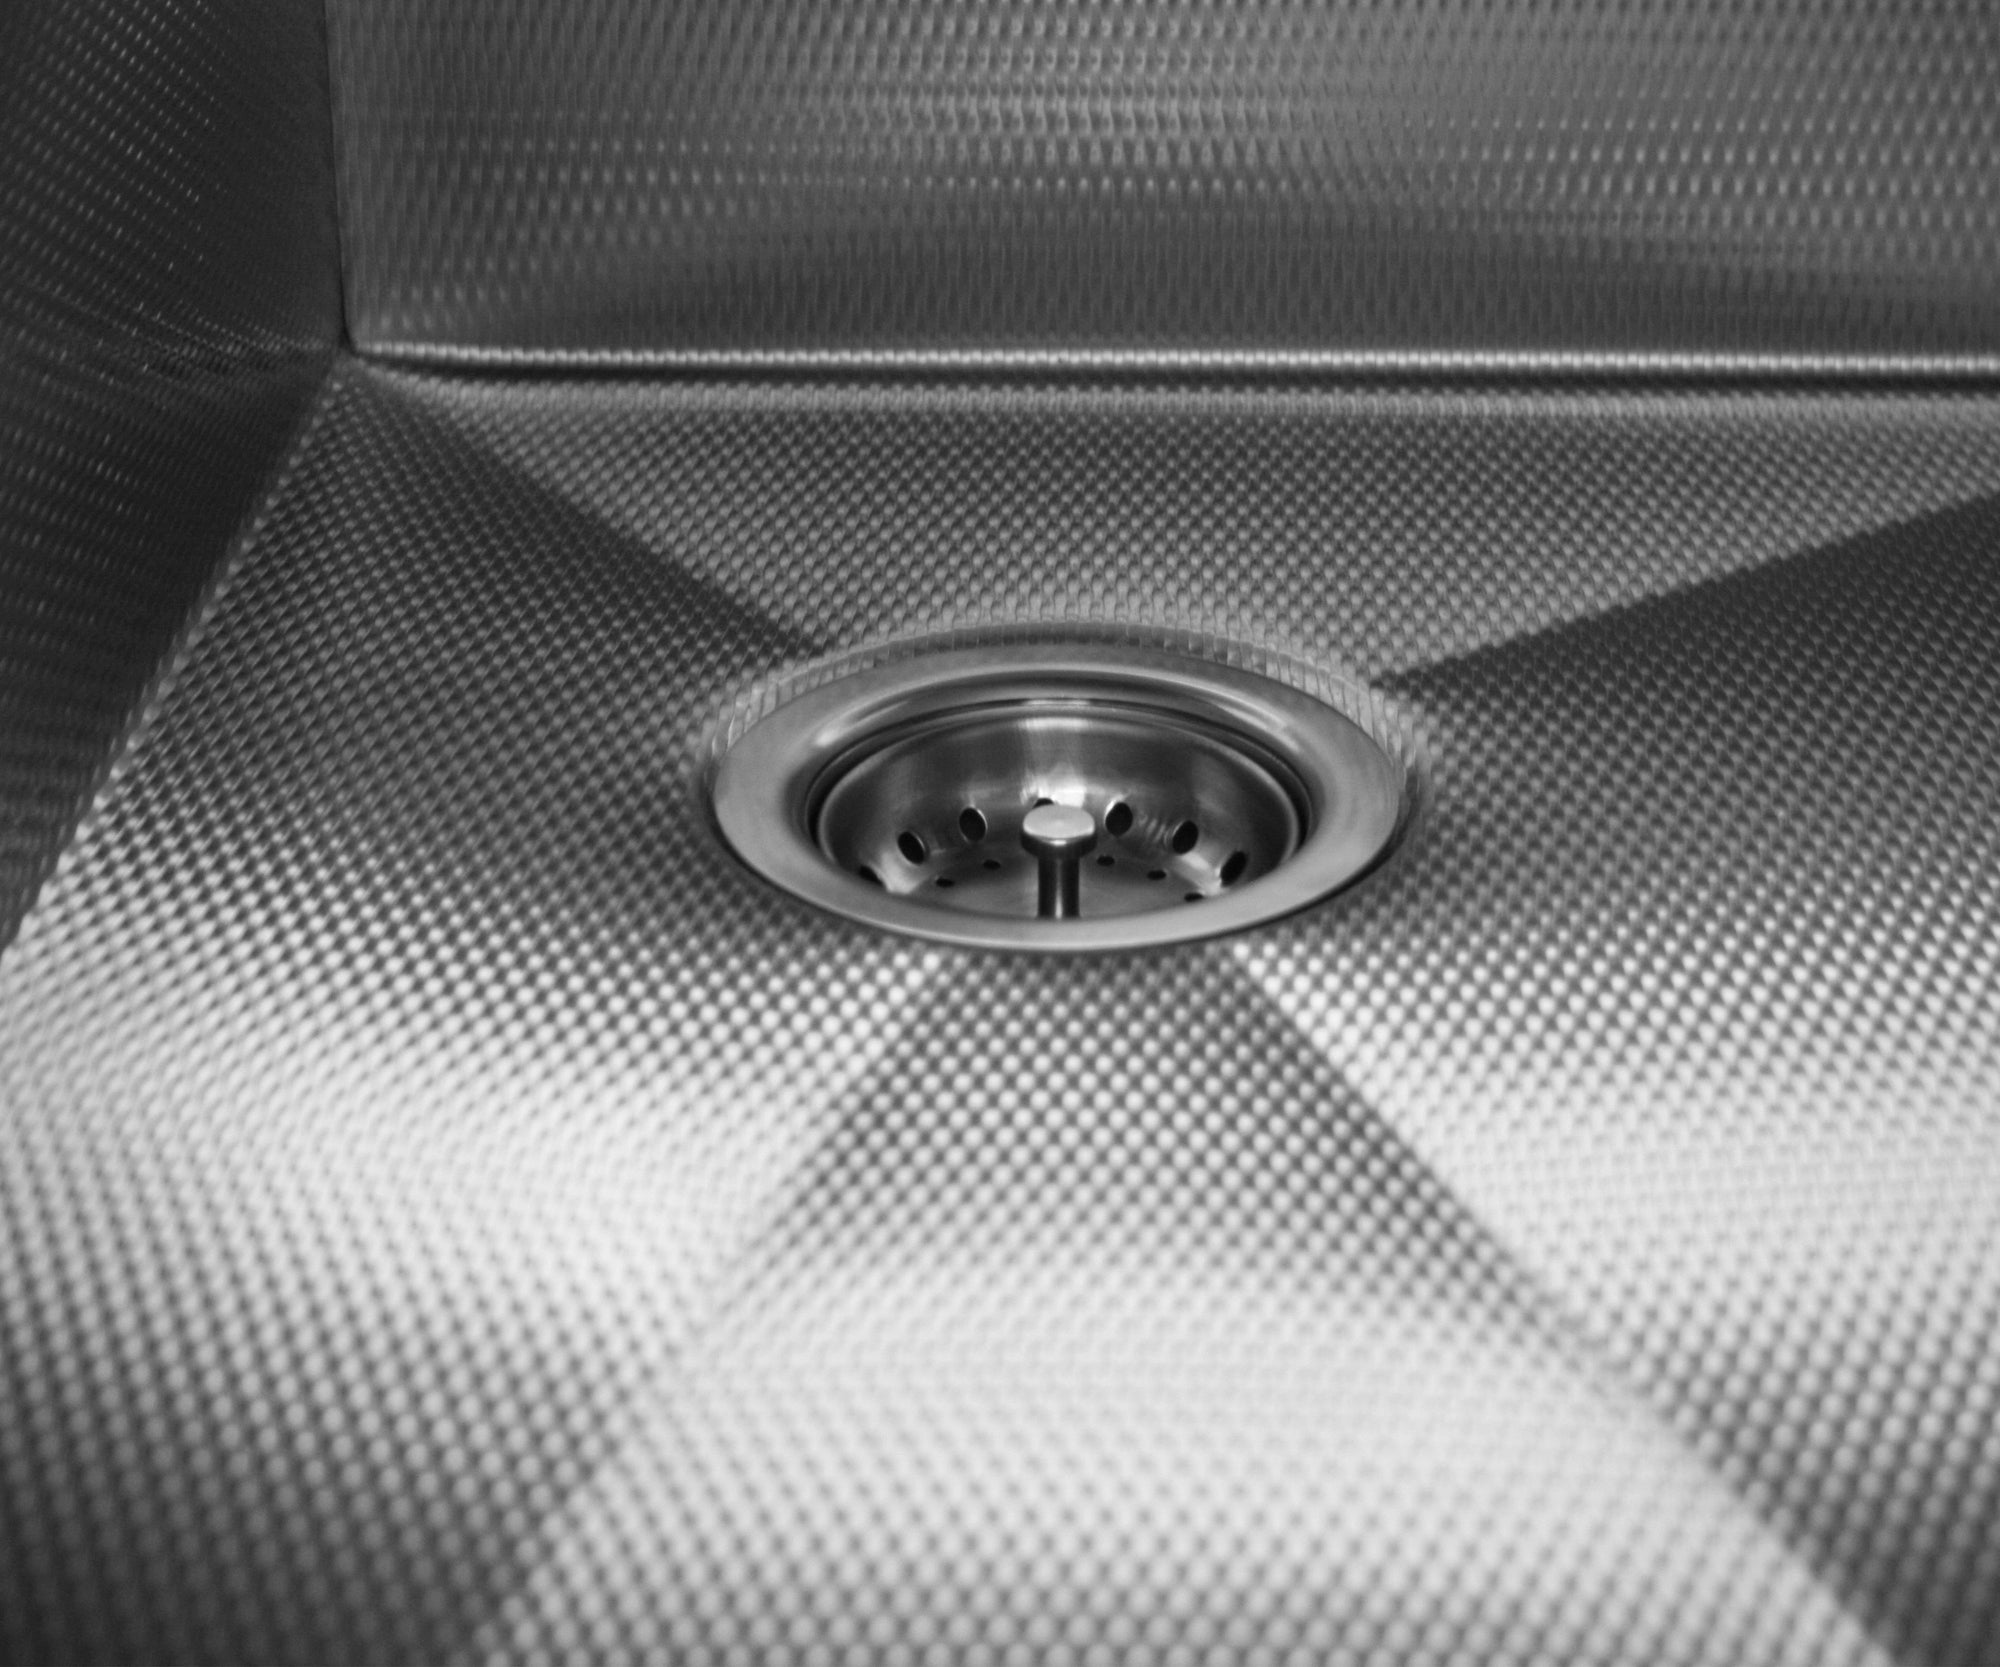 Textured stainless steel finish on a kitchen sink, Prestige by Havens.